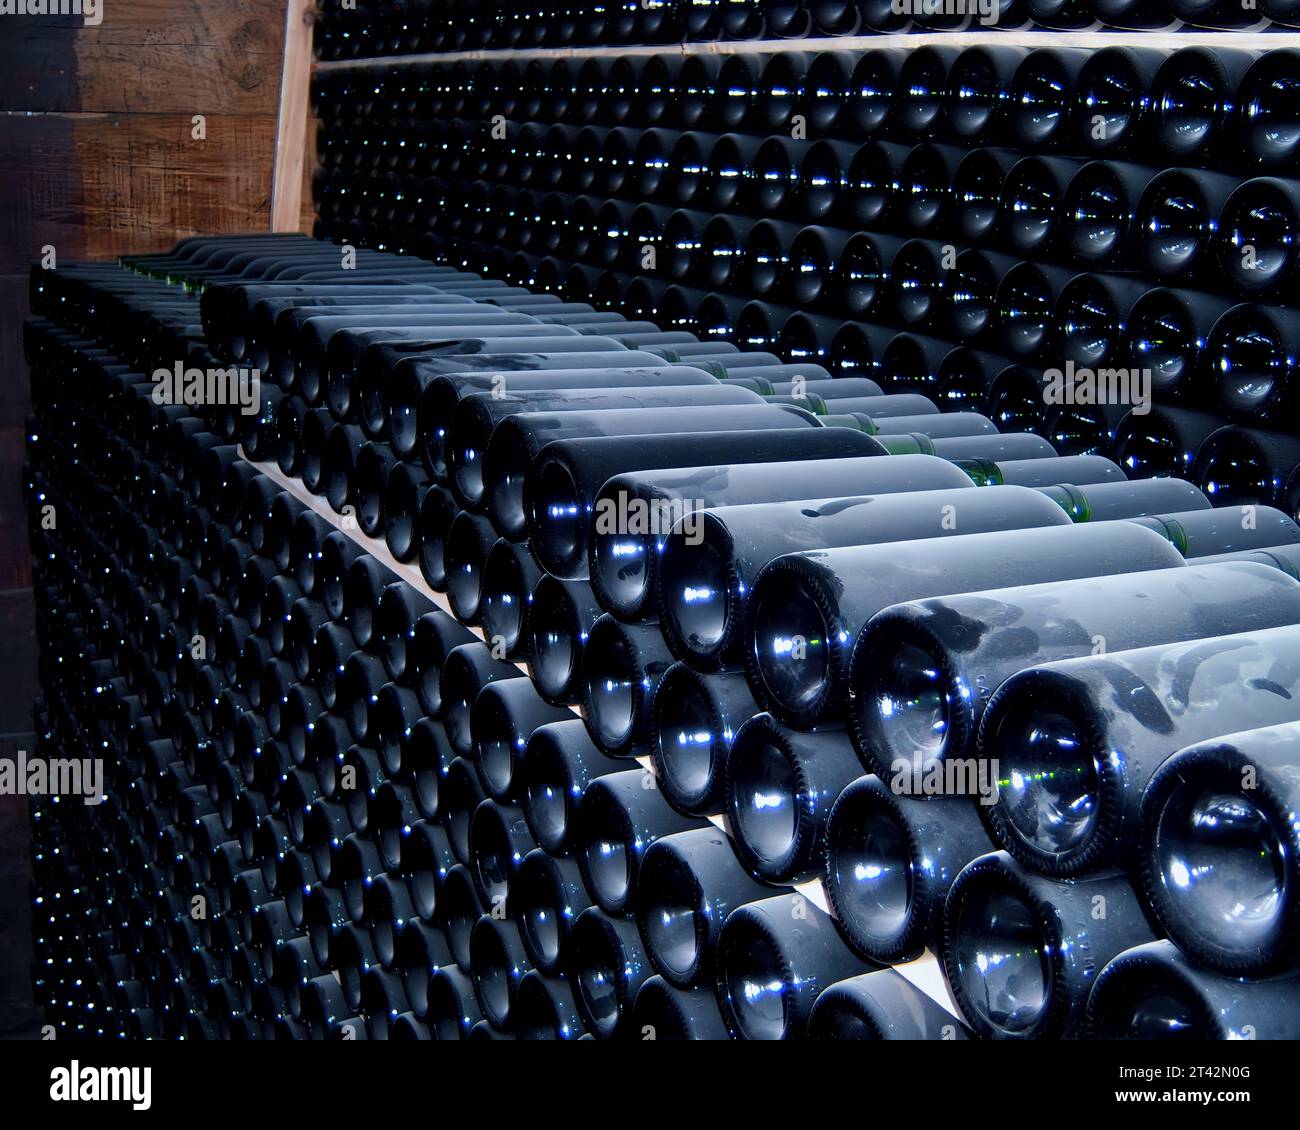 The dusty wine bottles in a cellar. Stock Photo